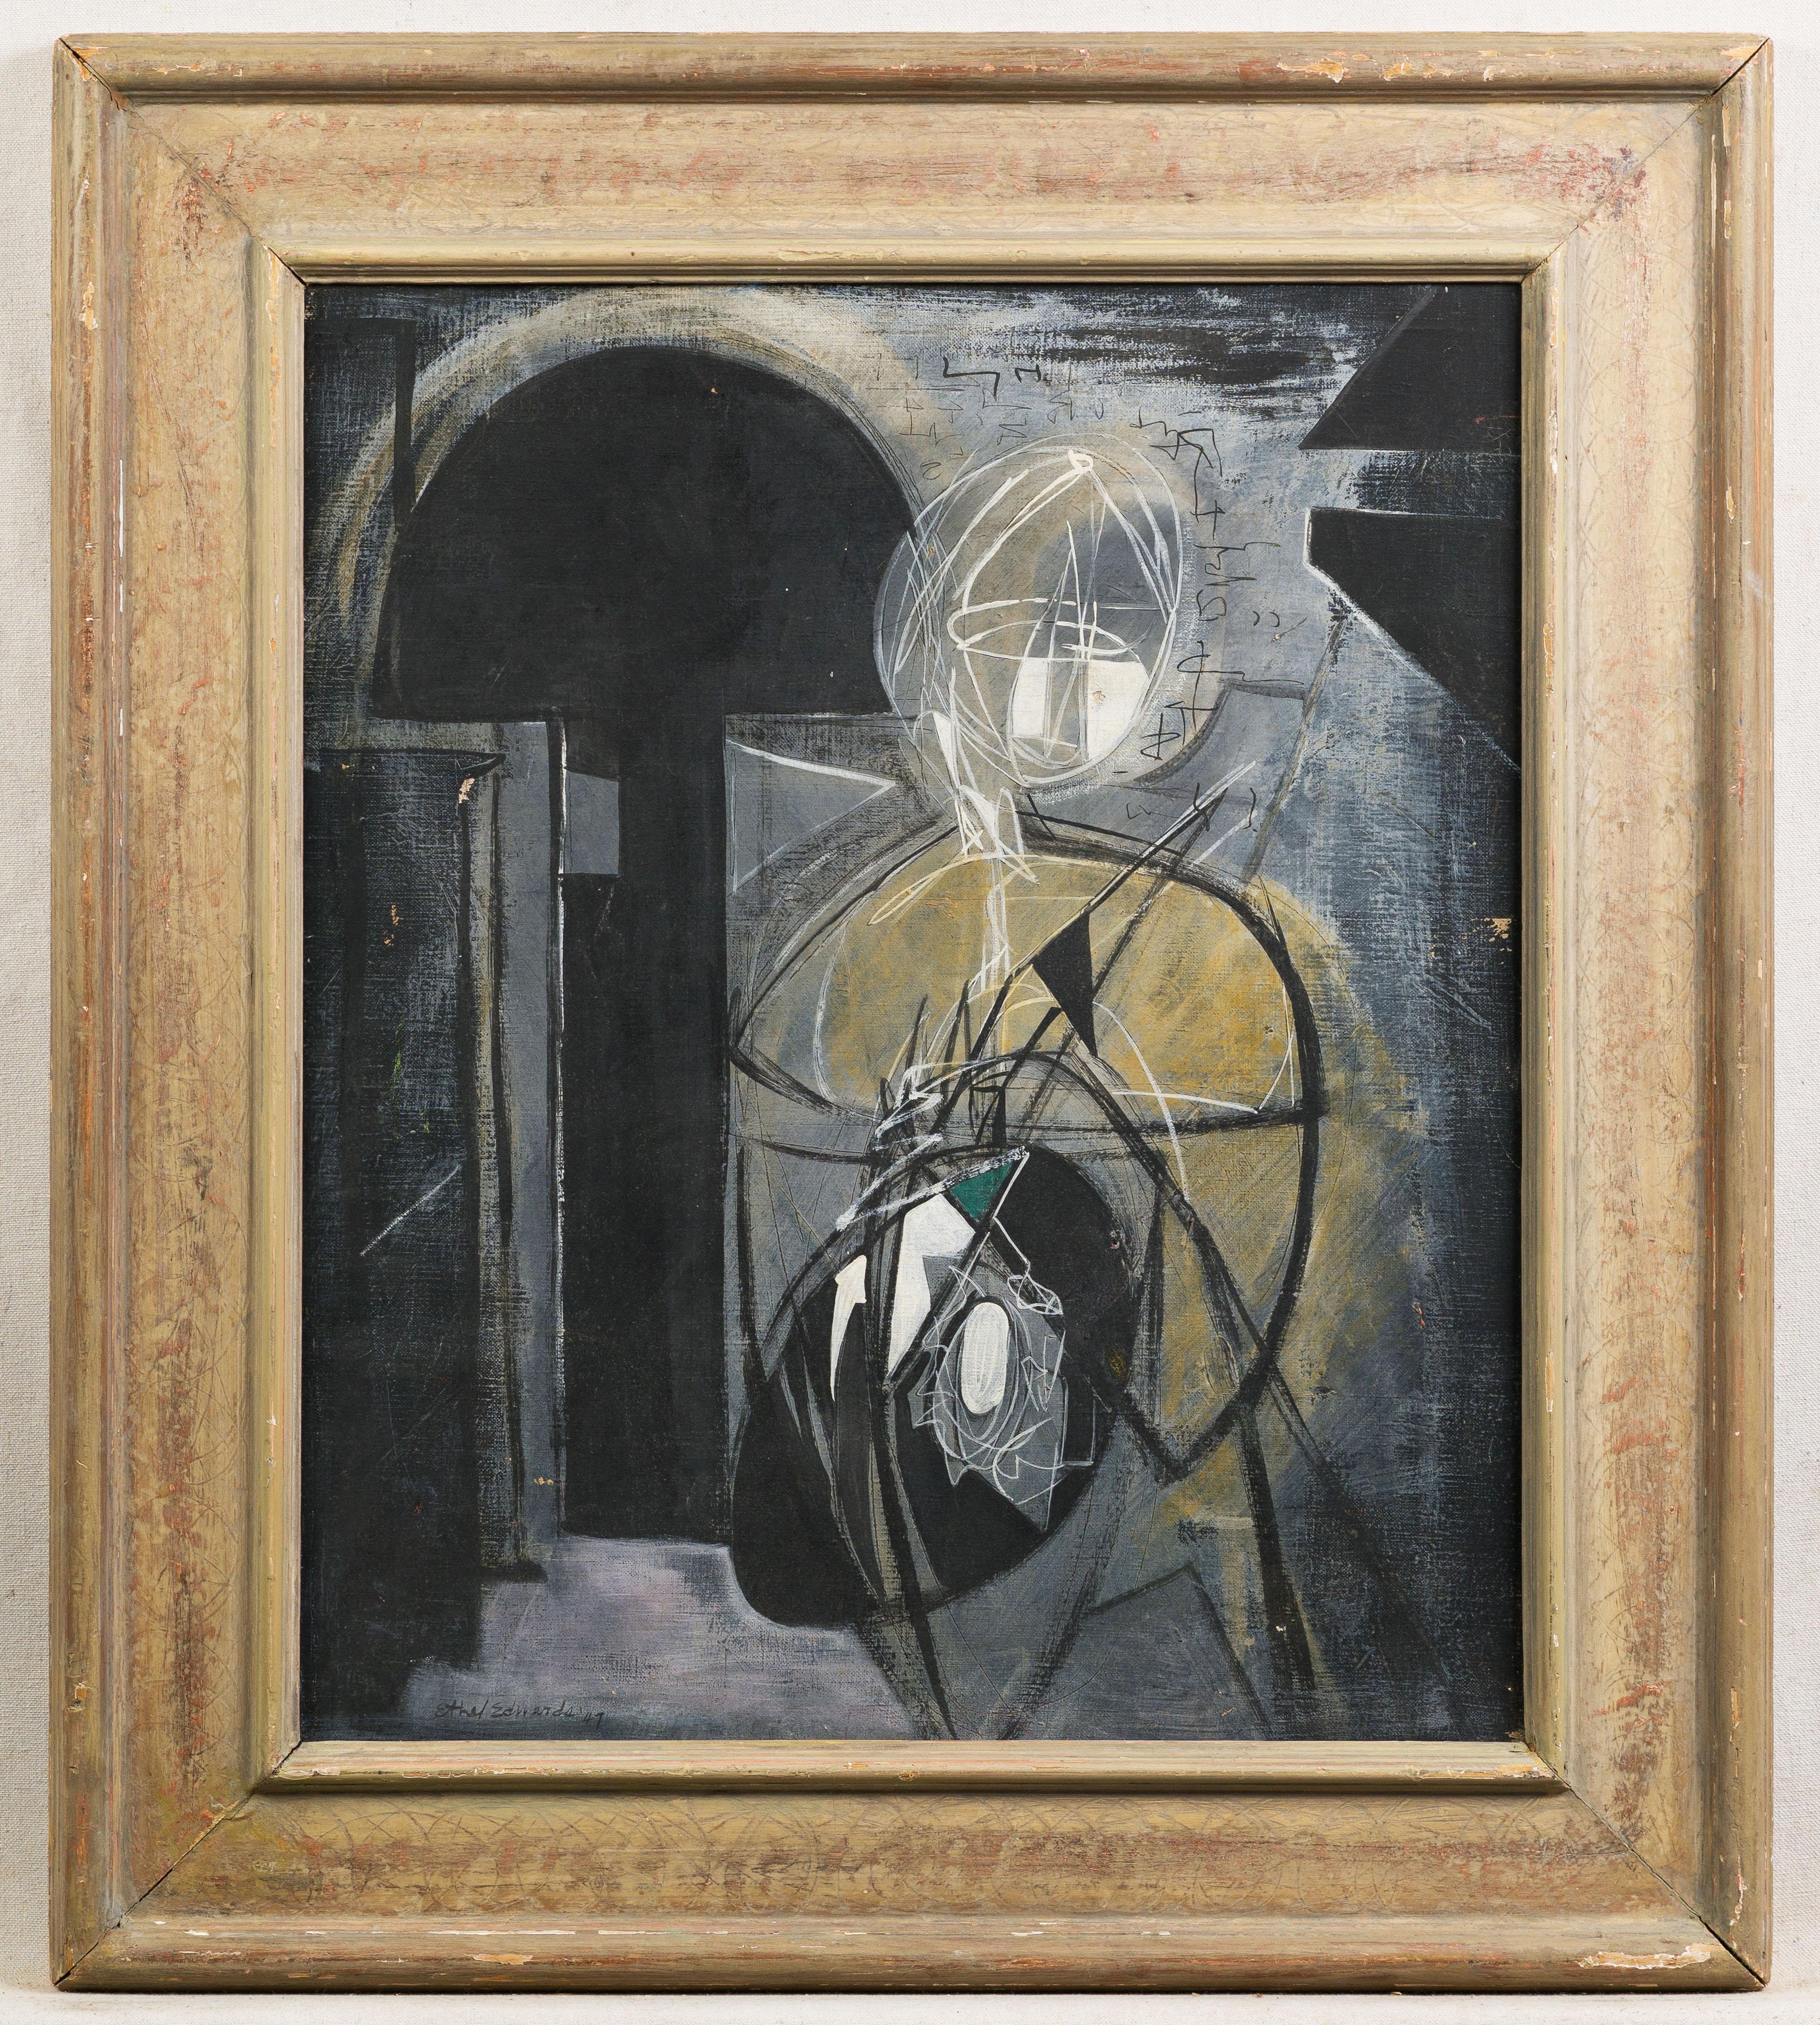 Vintage exhibited American modernist female abstract oil painting.  Oil on canvas.  Framed in a wonderful period frame.  Image size, 24H x 20L.  Titled 